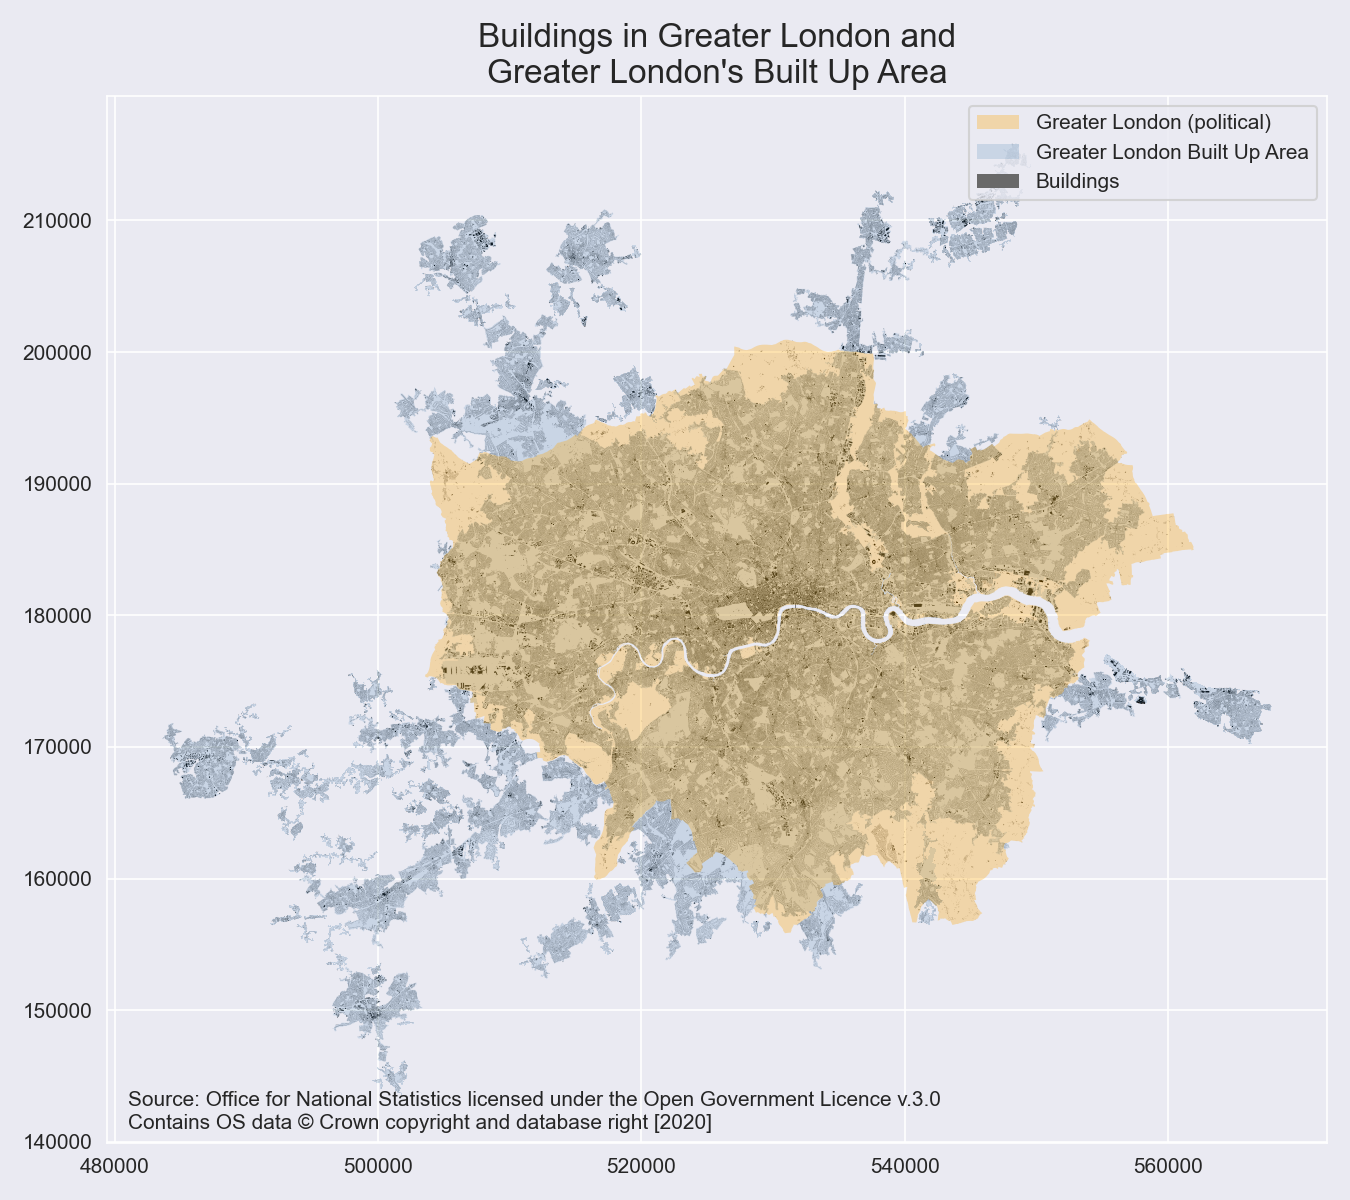 Greater London, its buildings and built up area